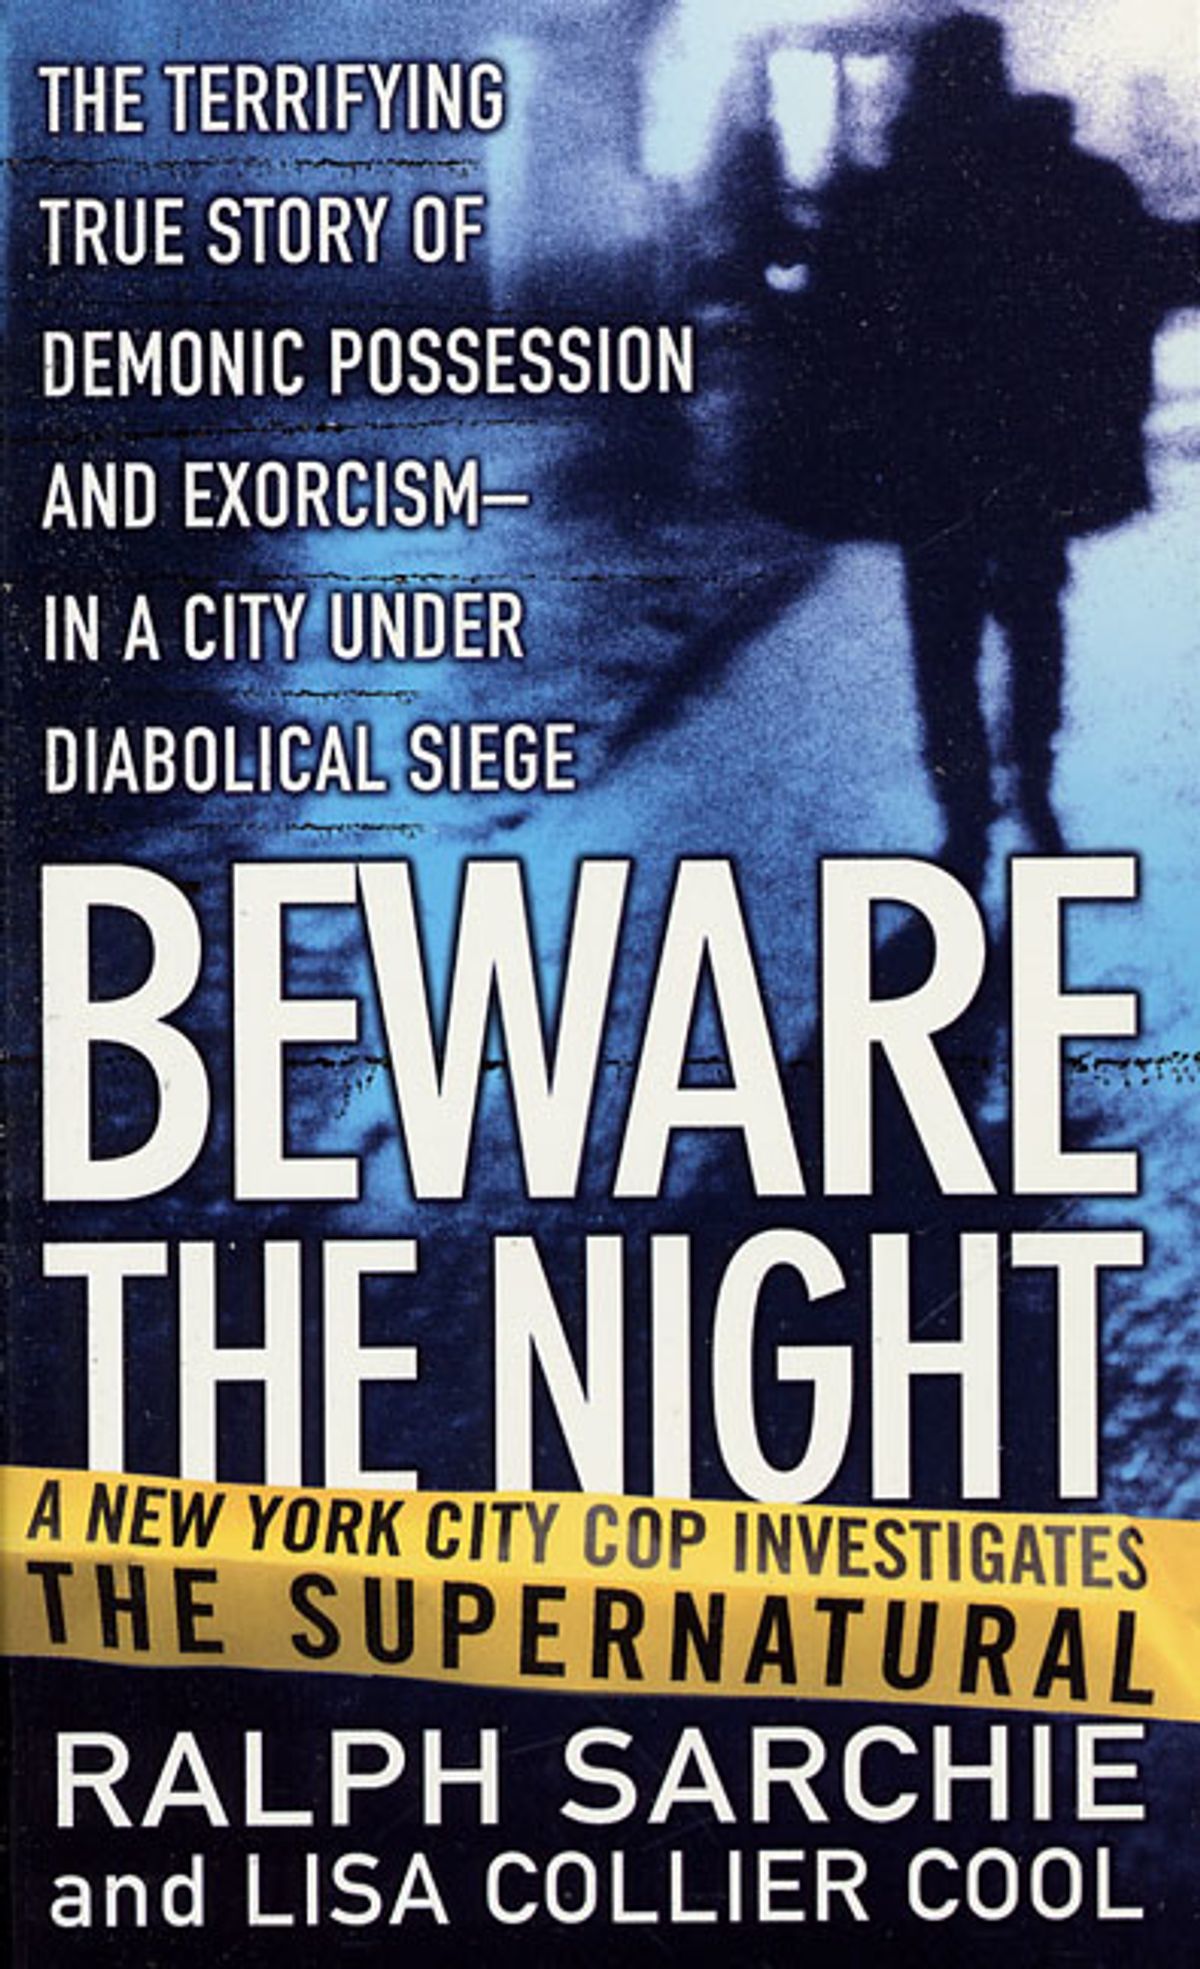 ‘Beware the Night’ by Ralph Sarchie and Lisa Collier Cool